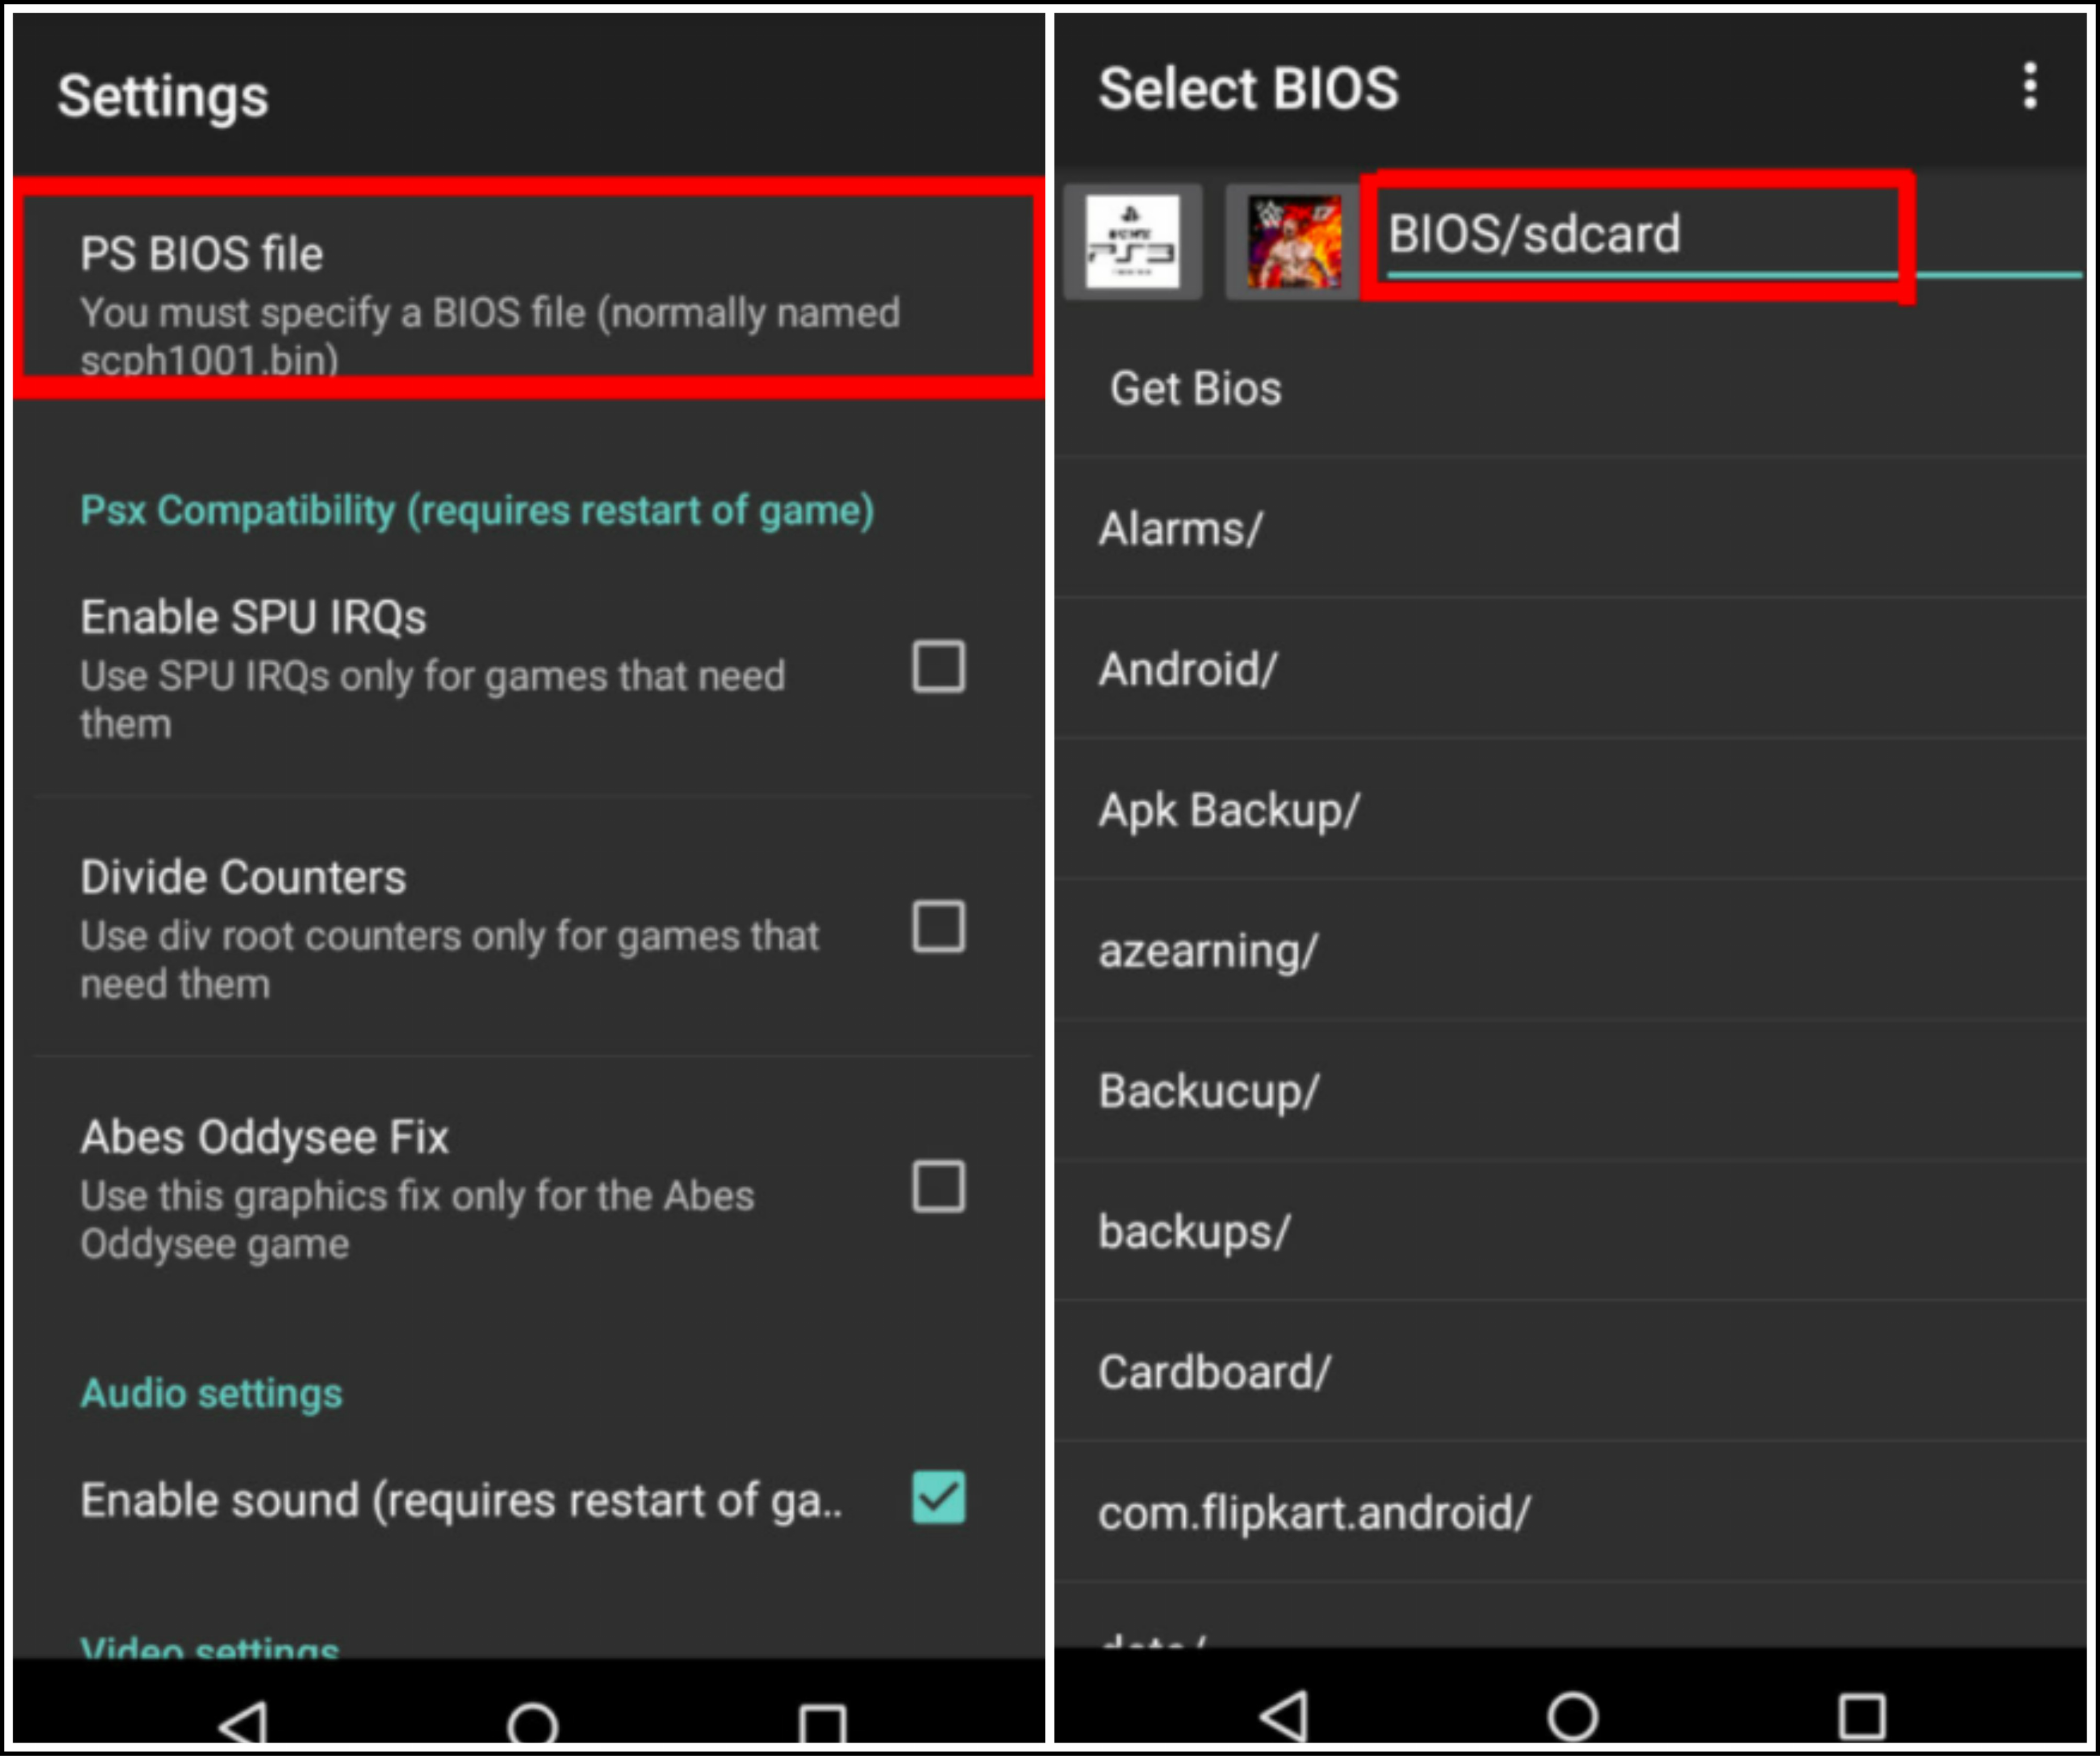 download game ps3 emulator for android